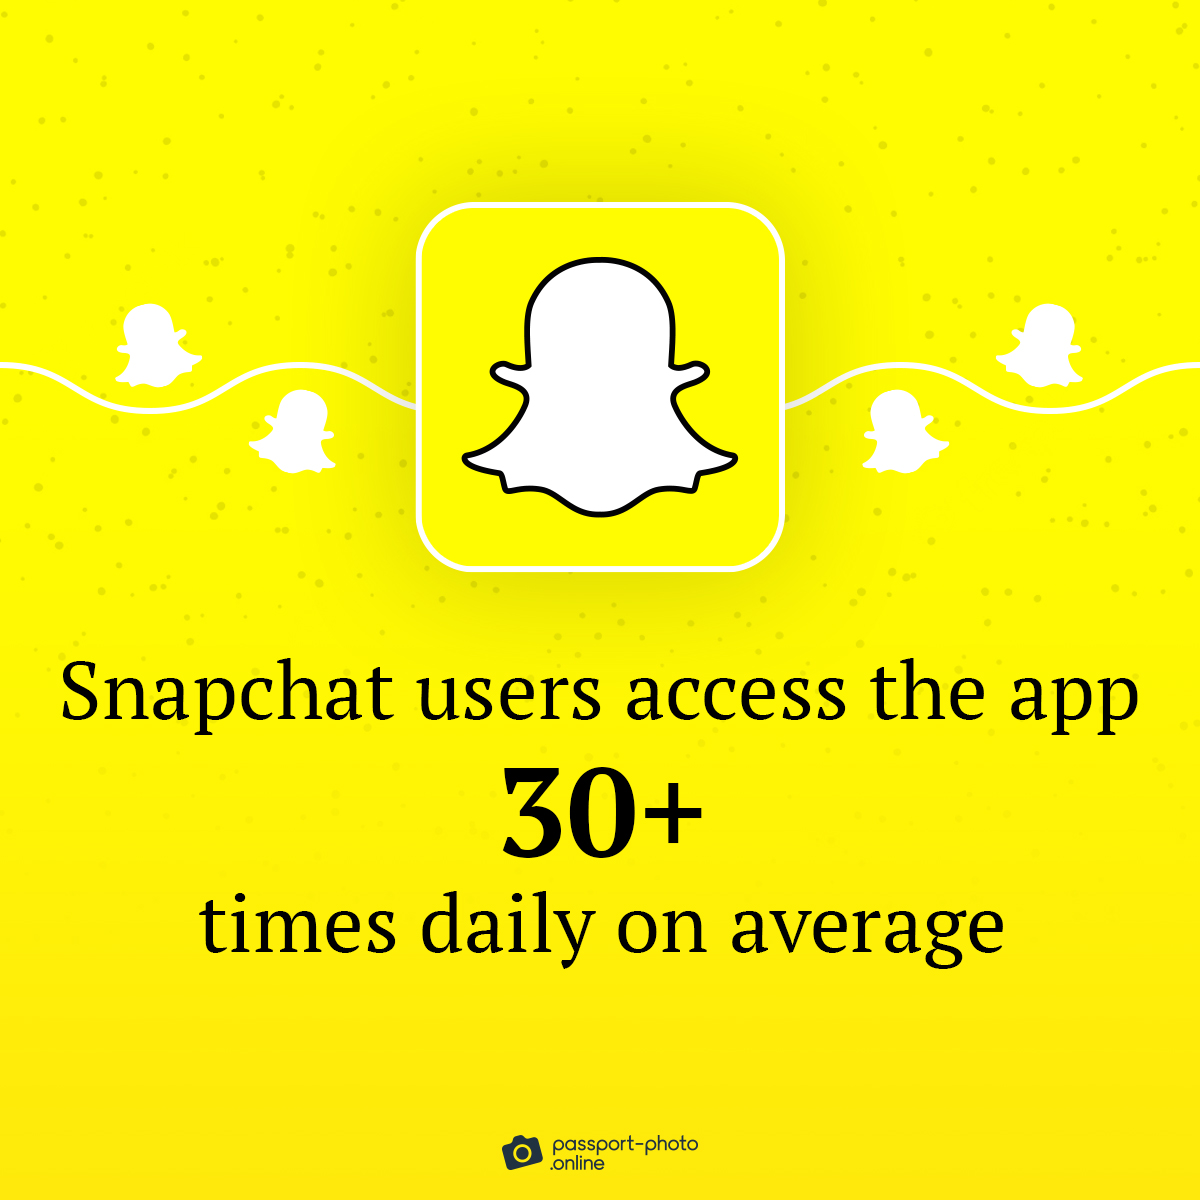 snapchat users access the app 30+ times daily on average